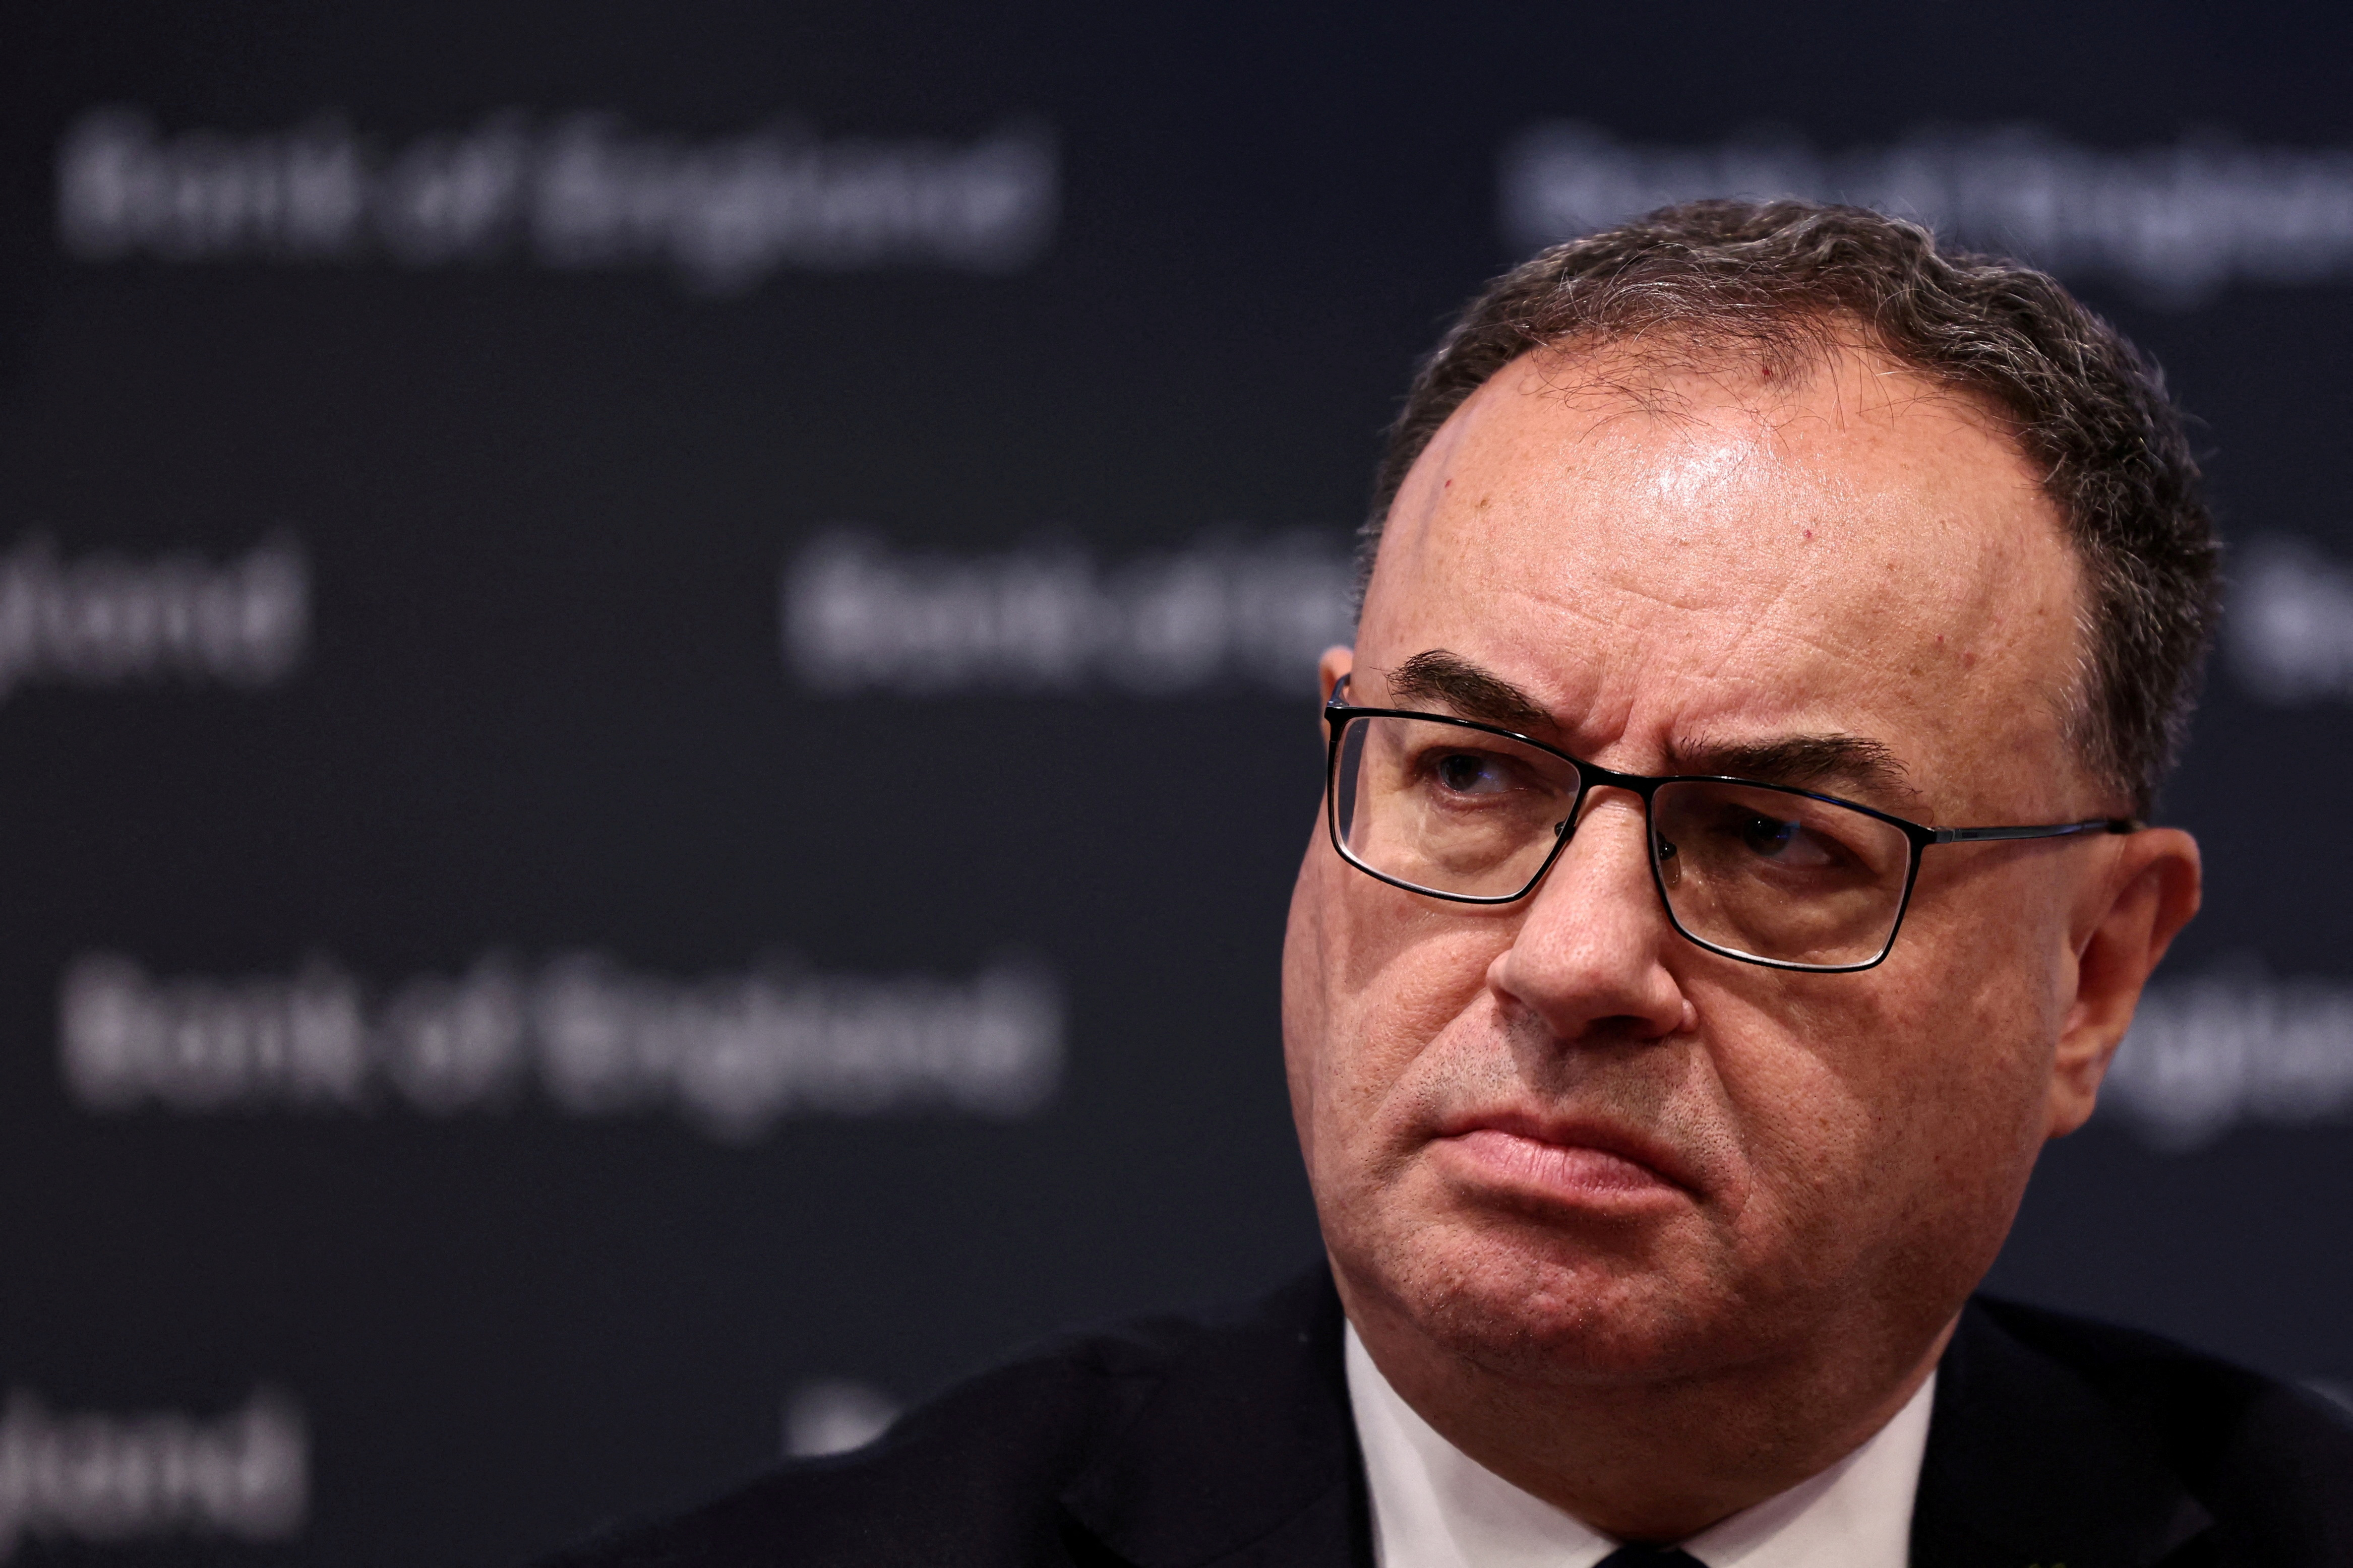 Governor of the Bank of England Andrew Bailey attends a press conference in London